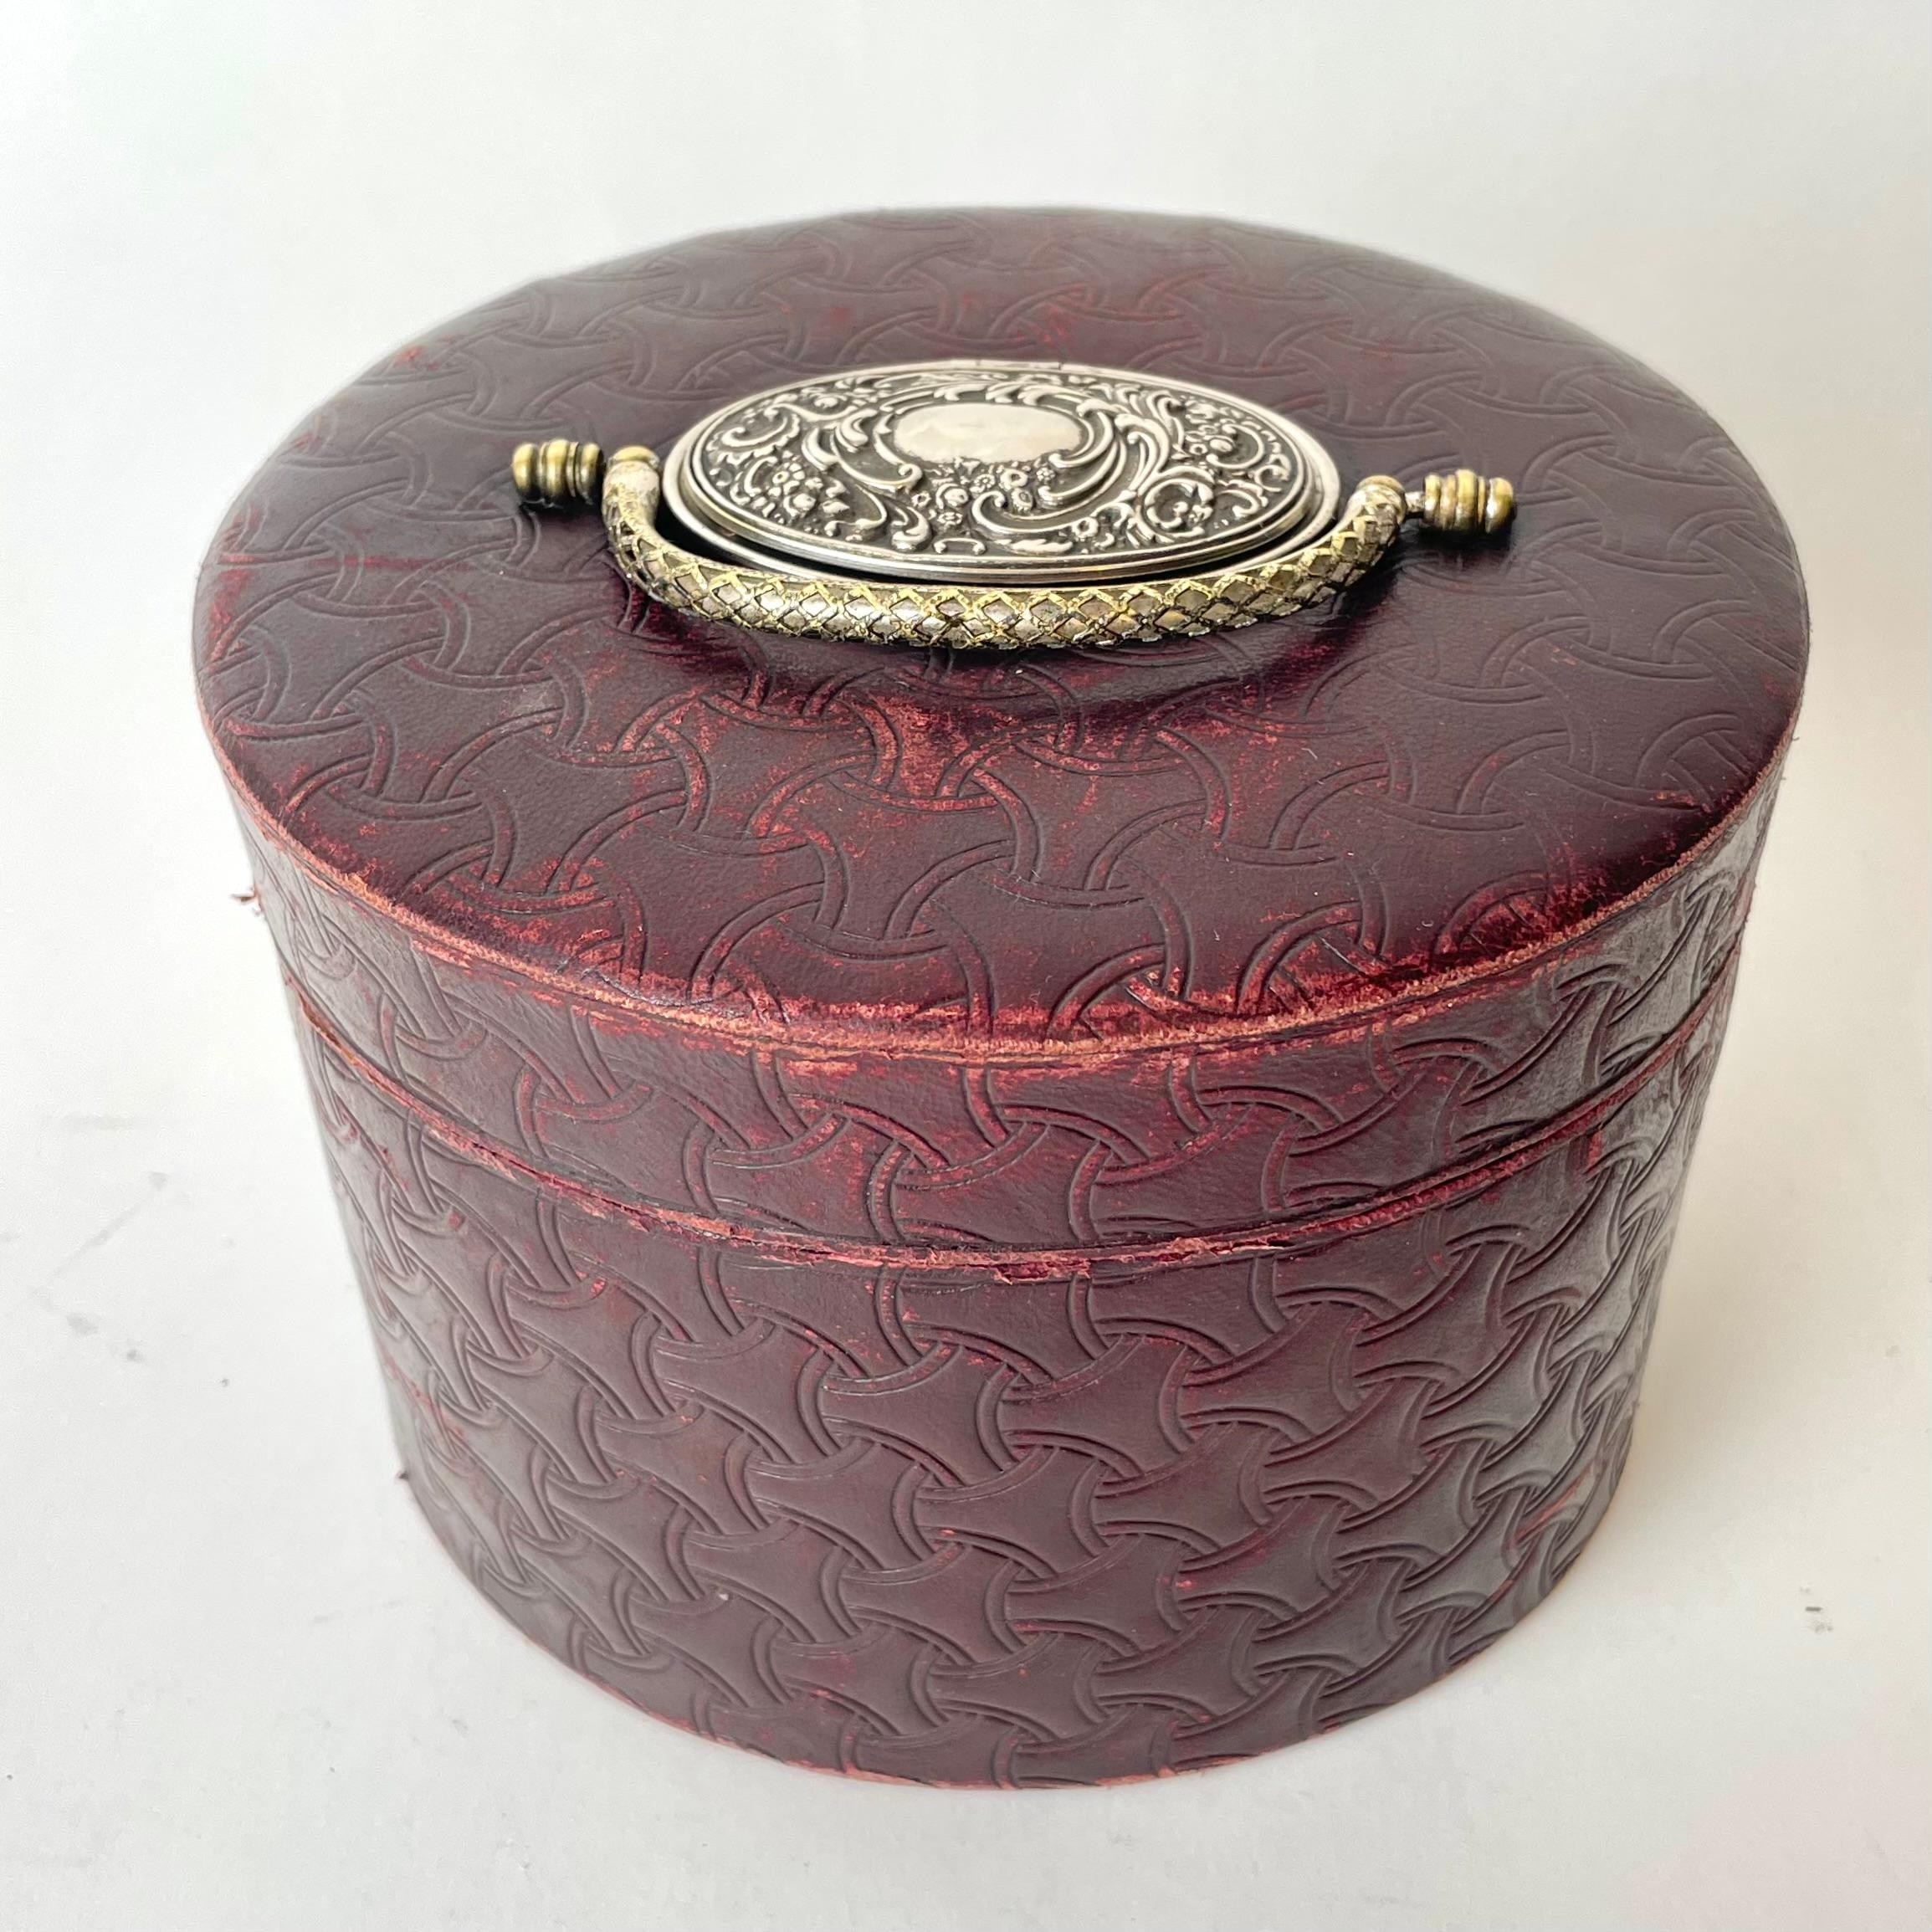 Burgundy Leather Collar Box with smaller Silver Plated Cufflink Box on top, used for detachable collars, 1890. Additional storage on top, for cufflinks, shirt buttons and miscellaneous. Leather embossing in form of interlocking triangular patterns;